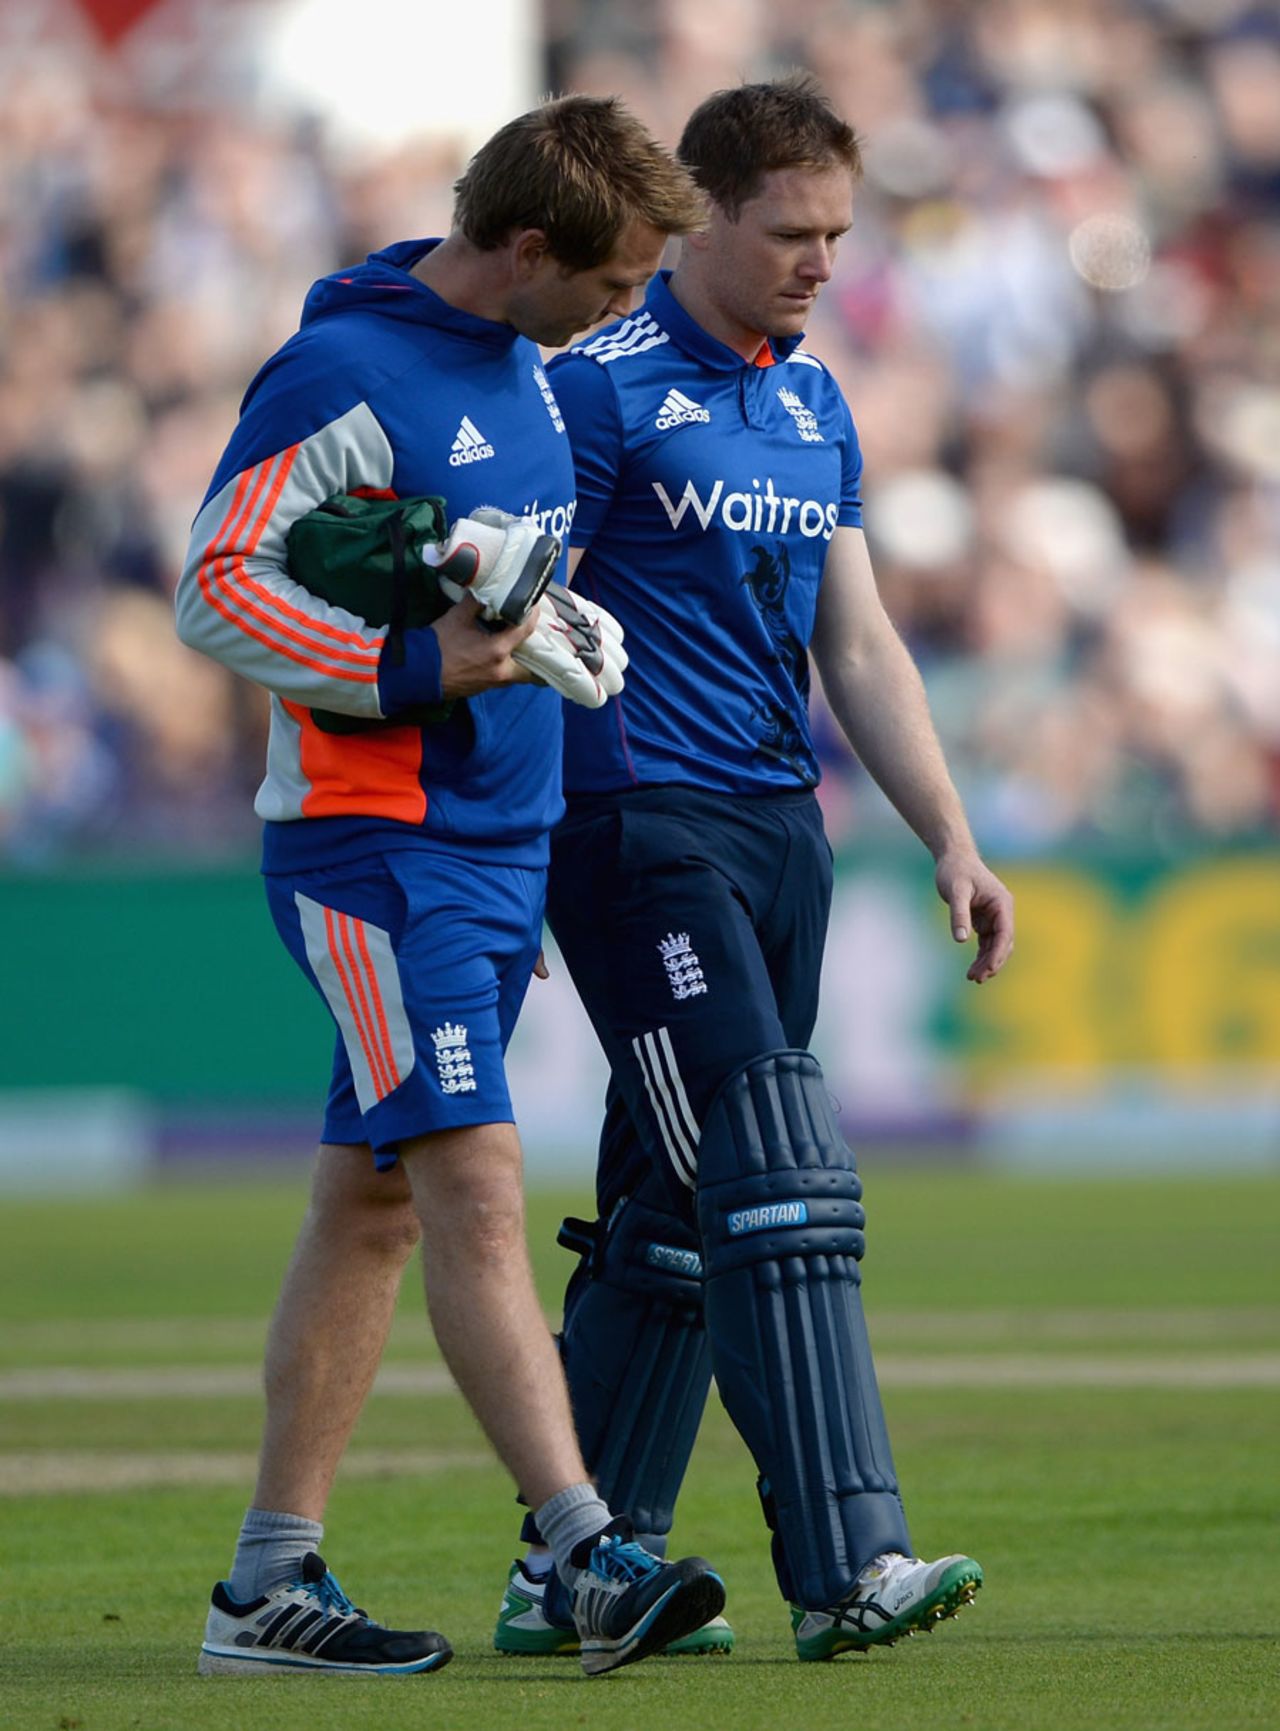 Eoin Morgan retired hurt after a blow to the head, England v Australia, 5th ODI, Old Trafford, September 13, 2015